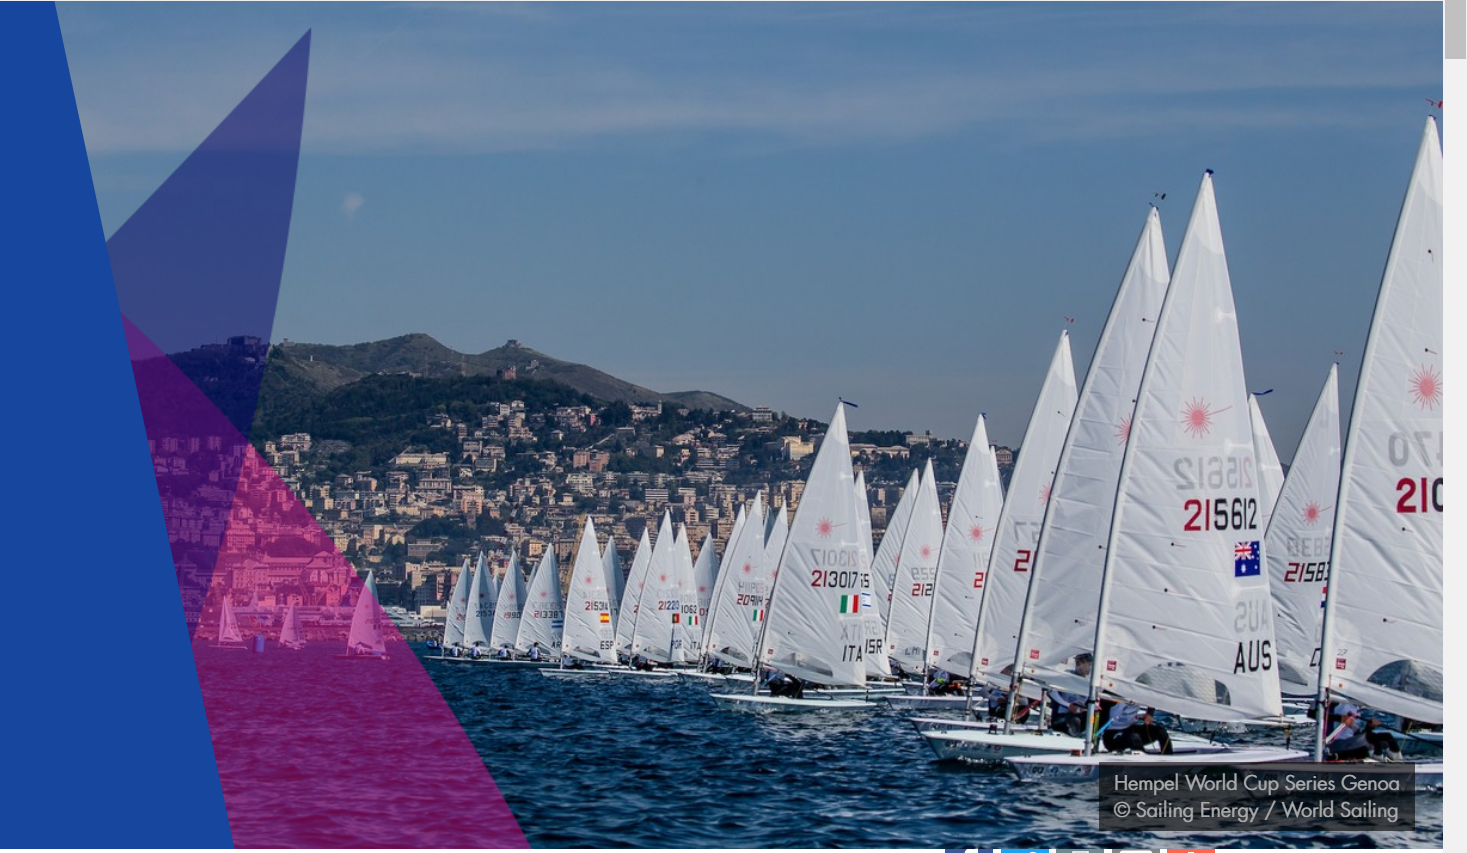 Hempel World Cup Series Genoa cancelled due to COVID-19